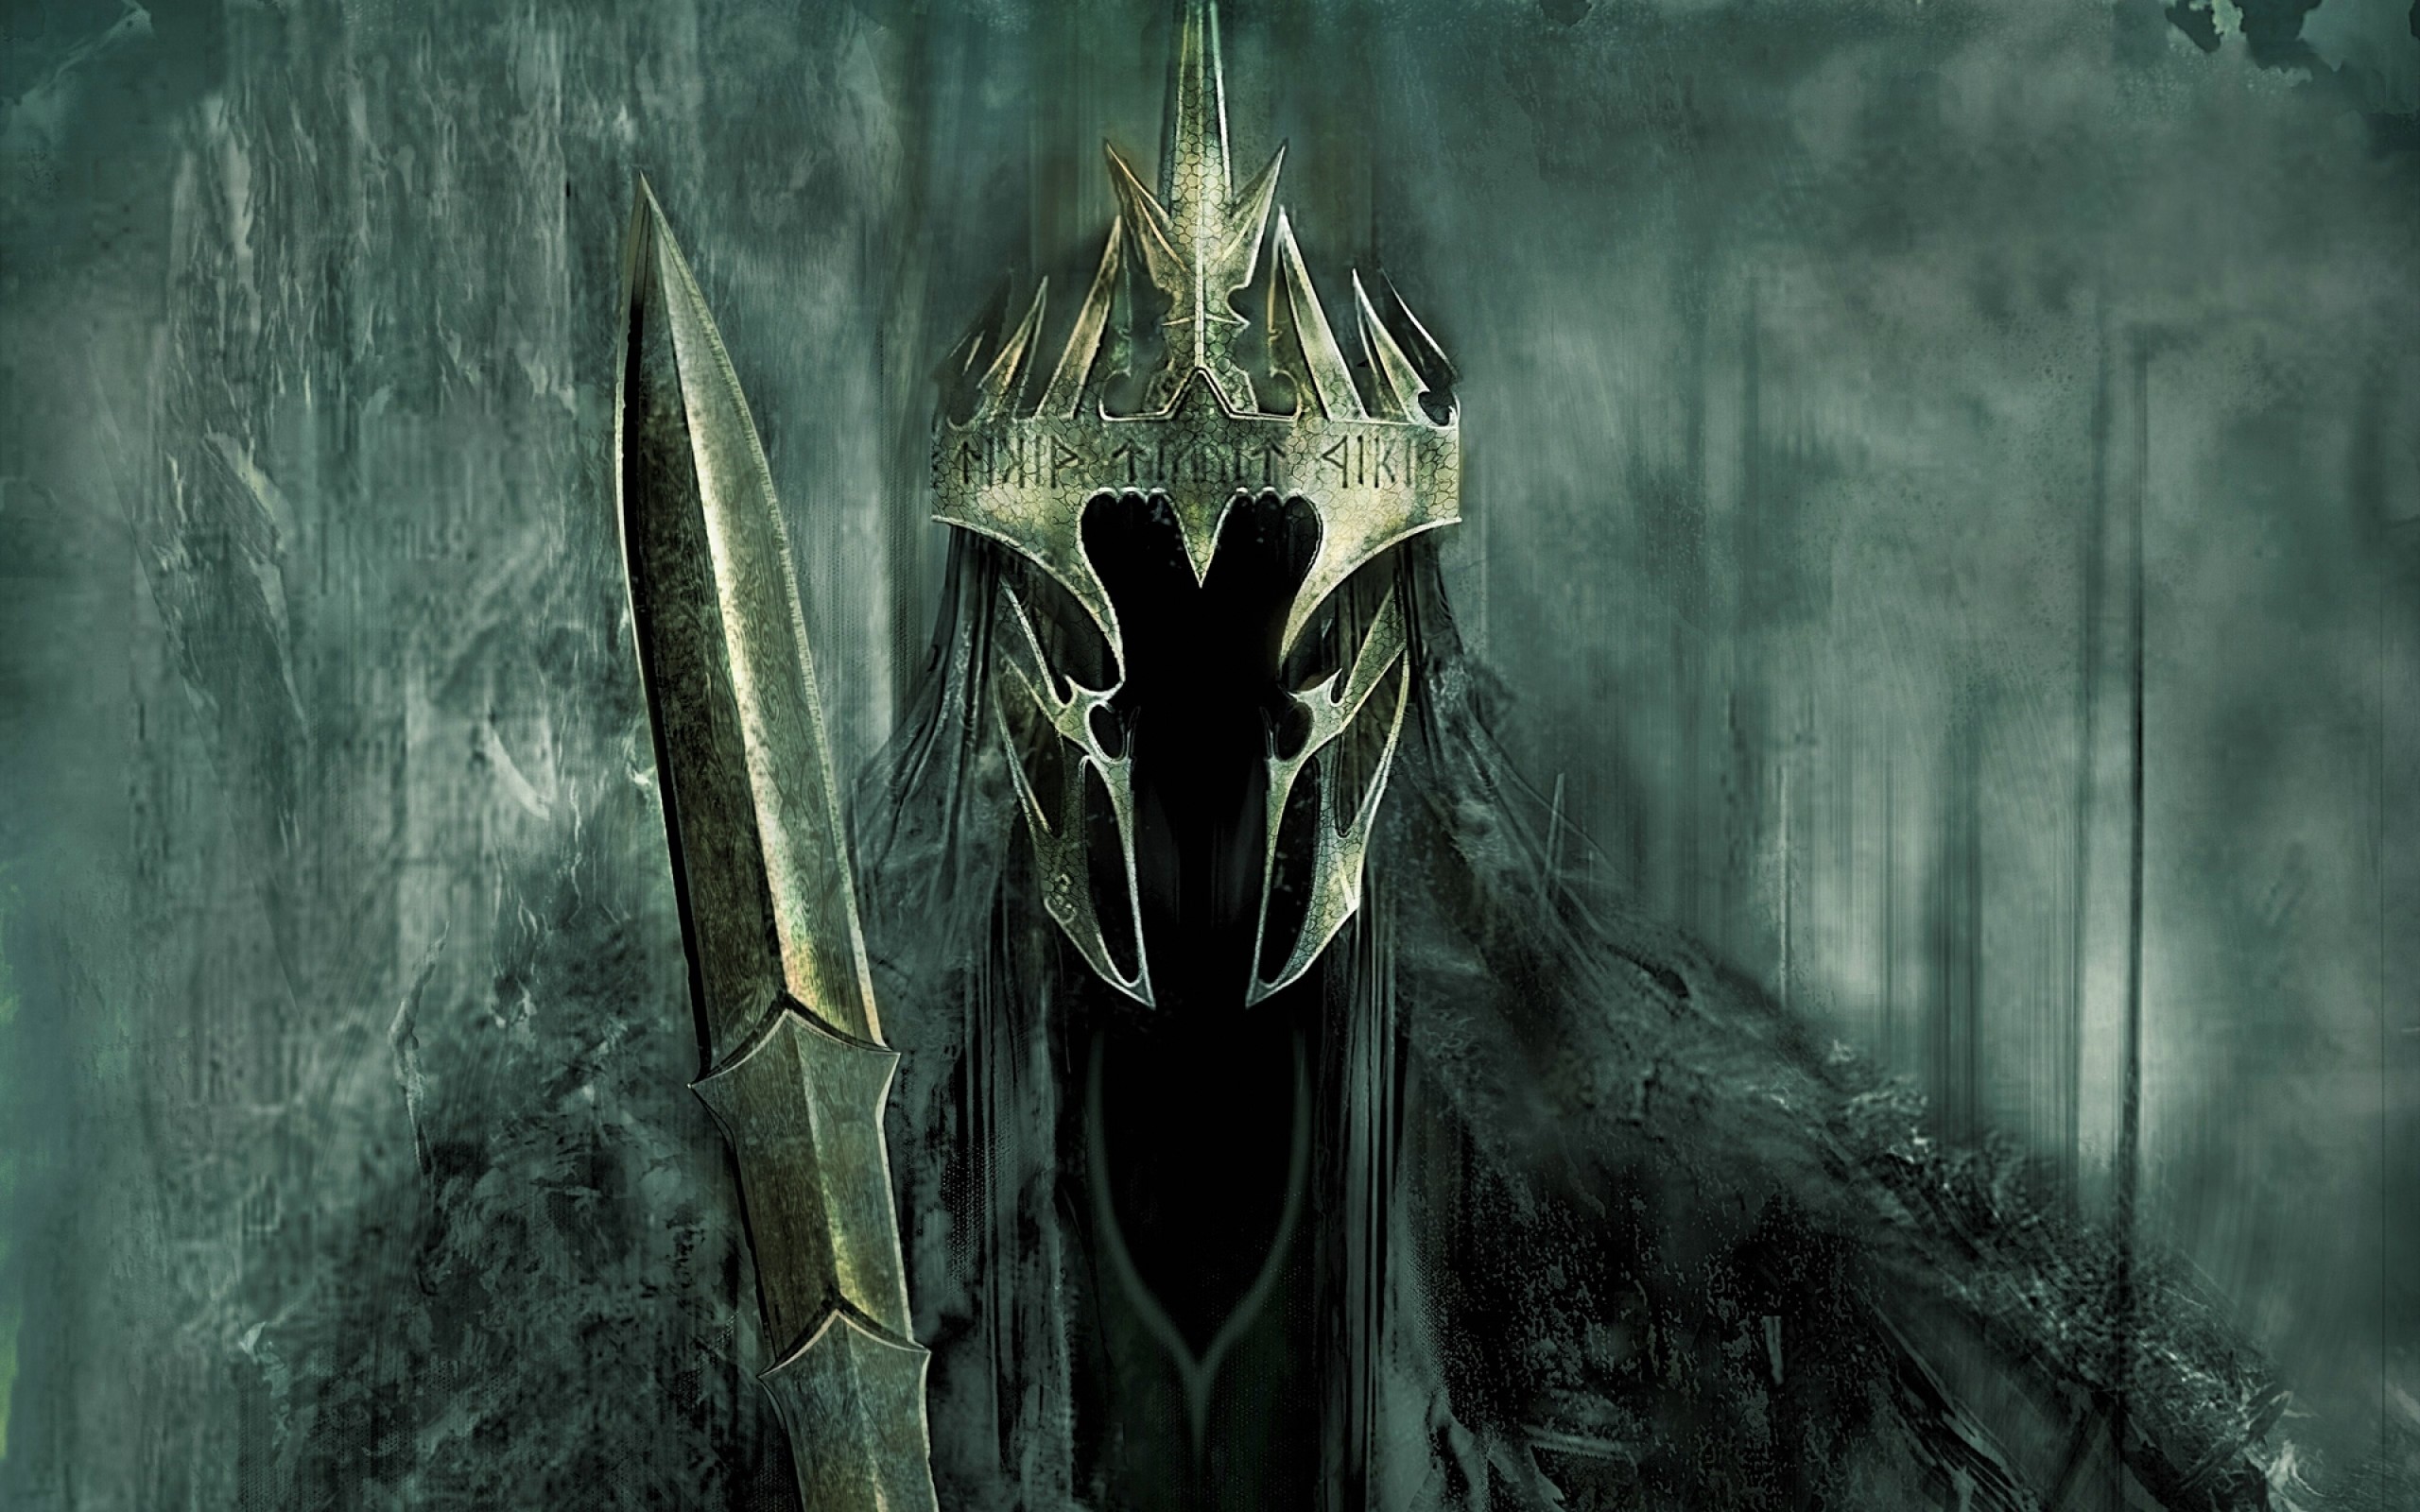 sauron, movie, the lord of the rings: the return of the king, lord of the rings, the lord of the rings